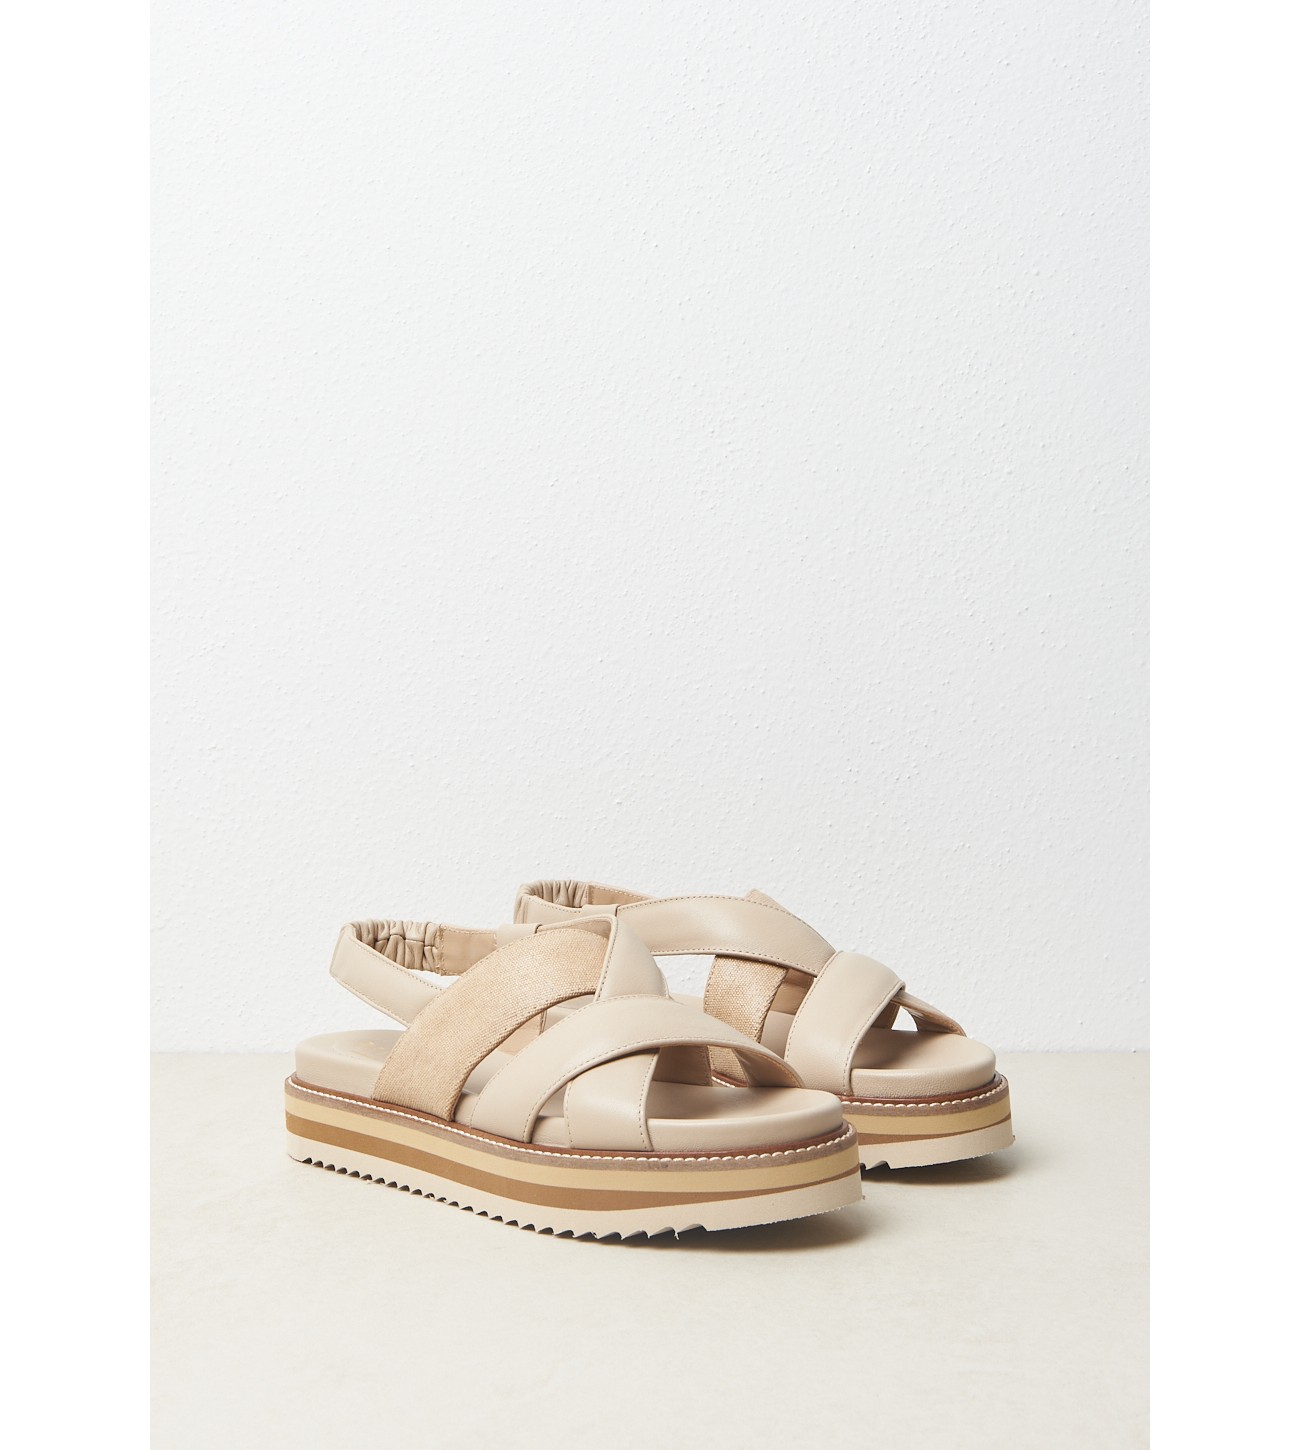 PESERICO_SANDALS_WITH_CROSSED_STRAPS_MARIONA_FASHION_CLOTHING_WOMAN_SHOP_ONLINE_S39546C0